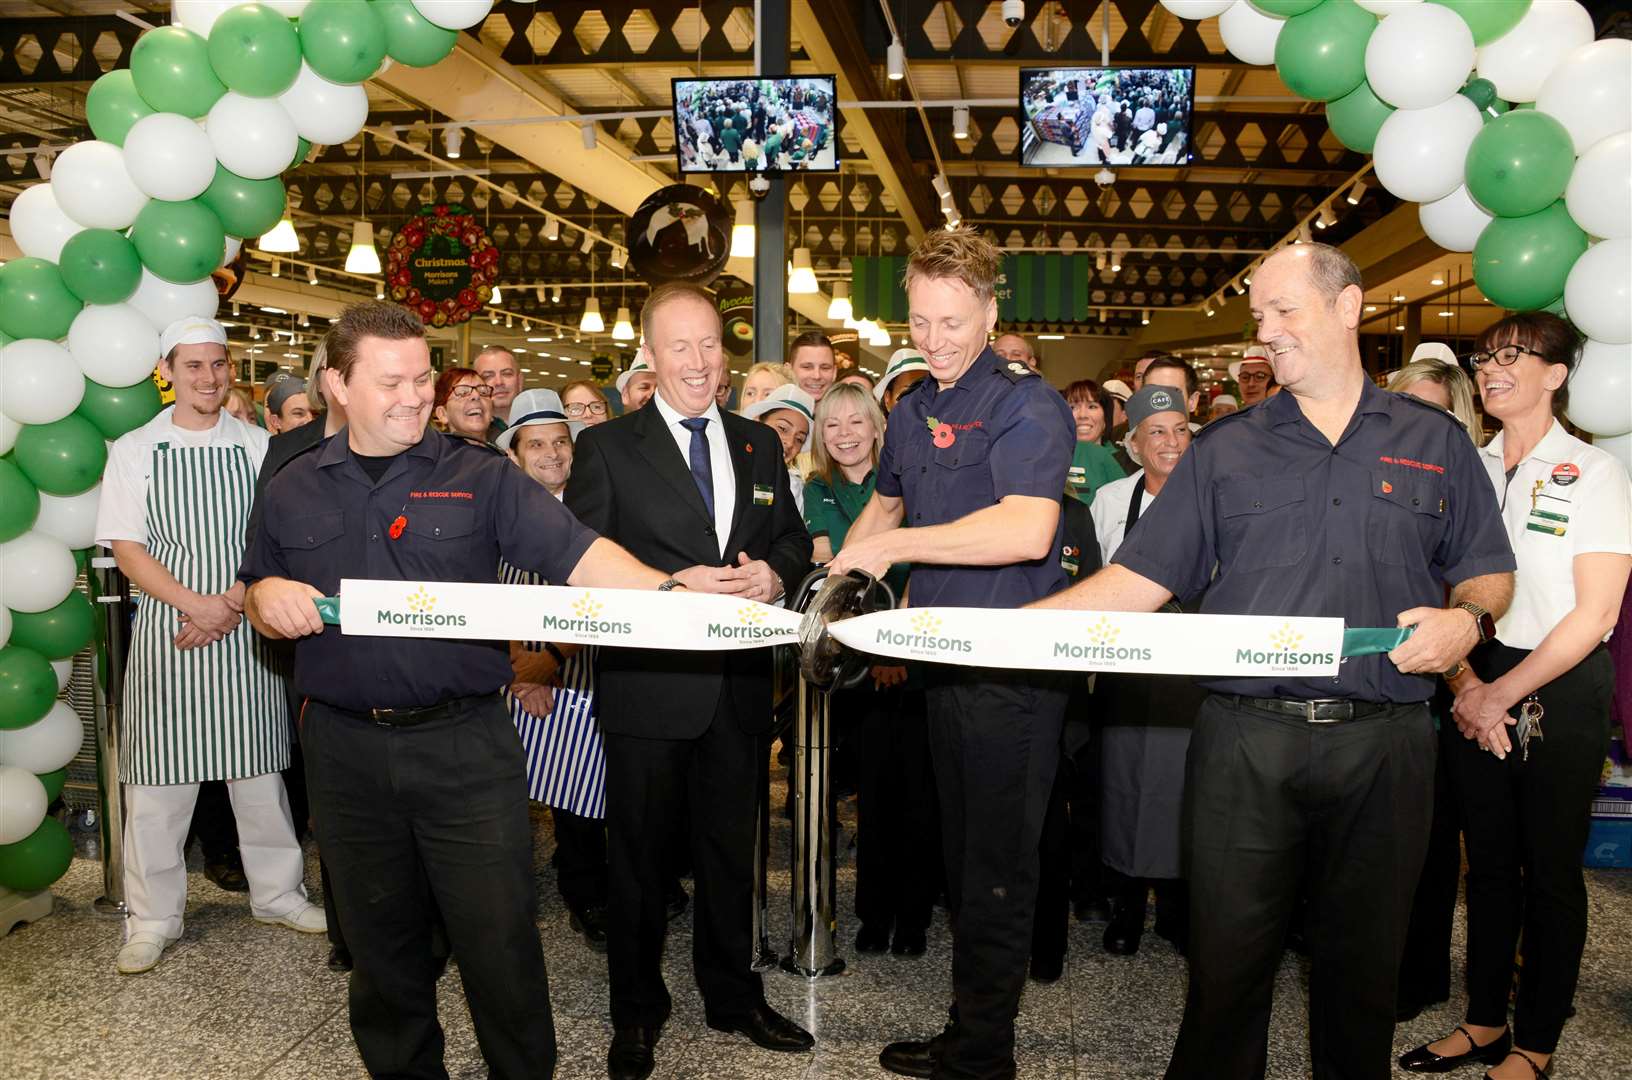 Folkestone fire station leader James Kirk officially opened the new Morrisons store in 2019. Picture: Paul Amos